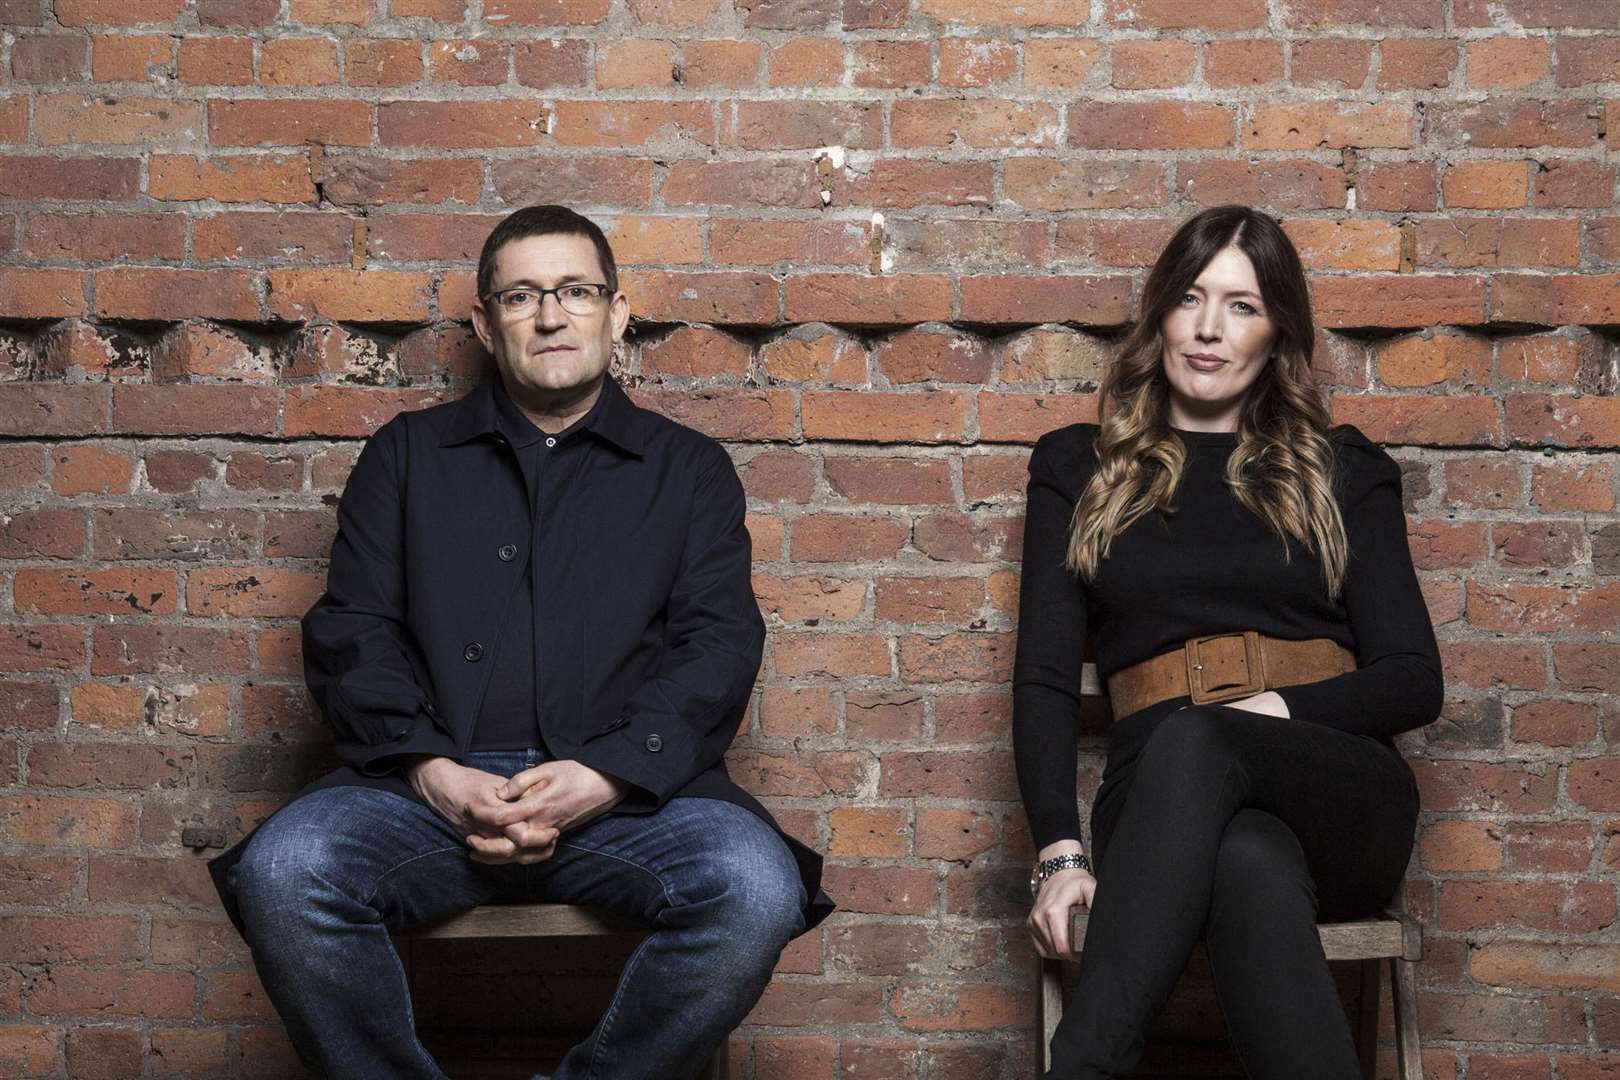 Paul Heaton and Jacqui Abbott will be at Forest live at Bedgebury Pinetum